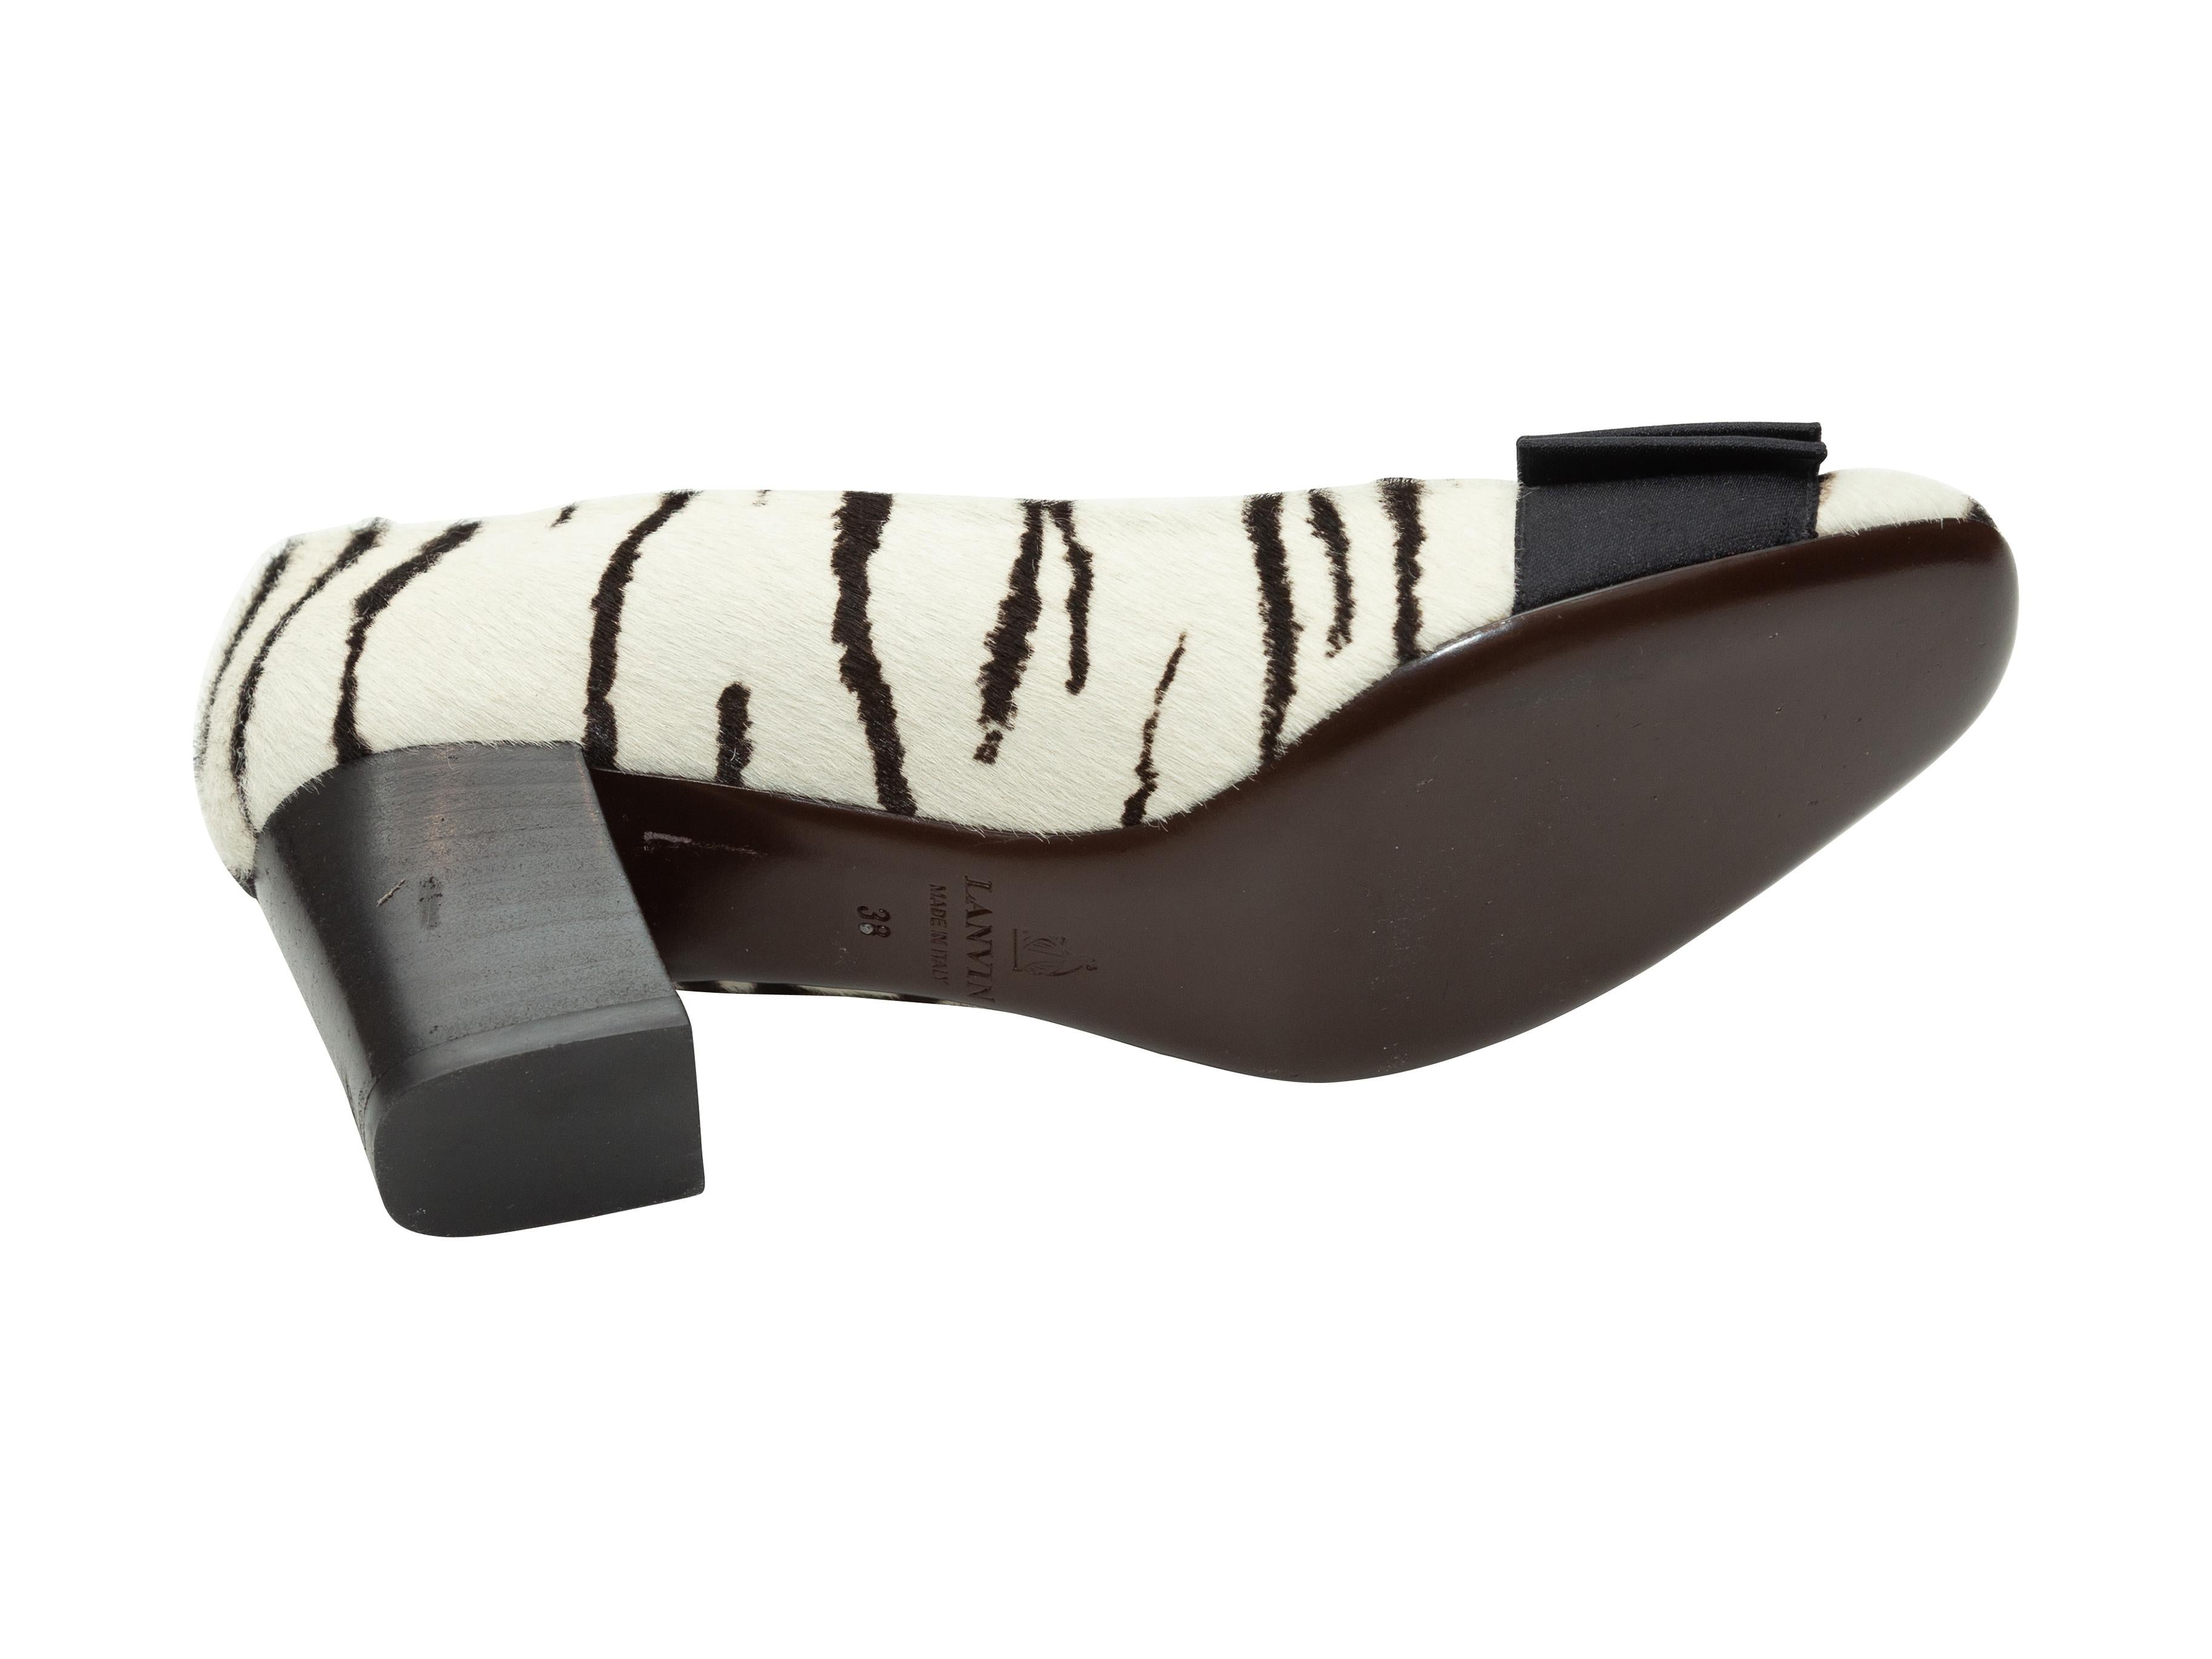 Product details: White and black round-toe ponyhair pumps by Lanvin. From the Fall/Winter 2013 Collection. Zebra print throughout. Bow accents at toes. Stacked heels. Designer size 38. 2